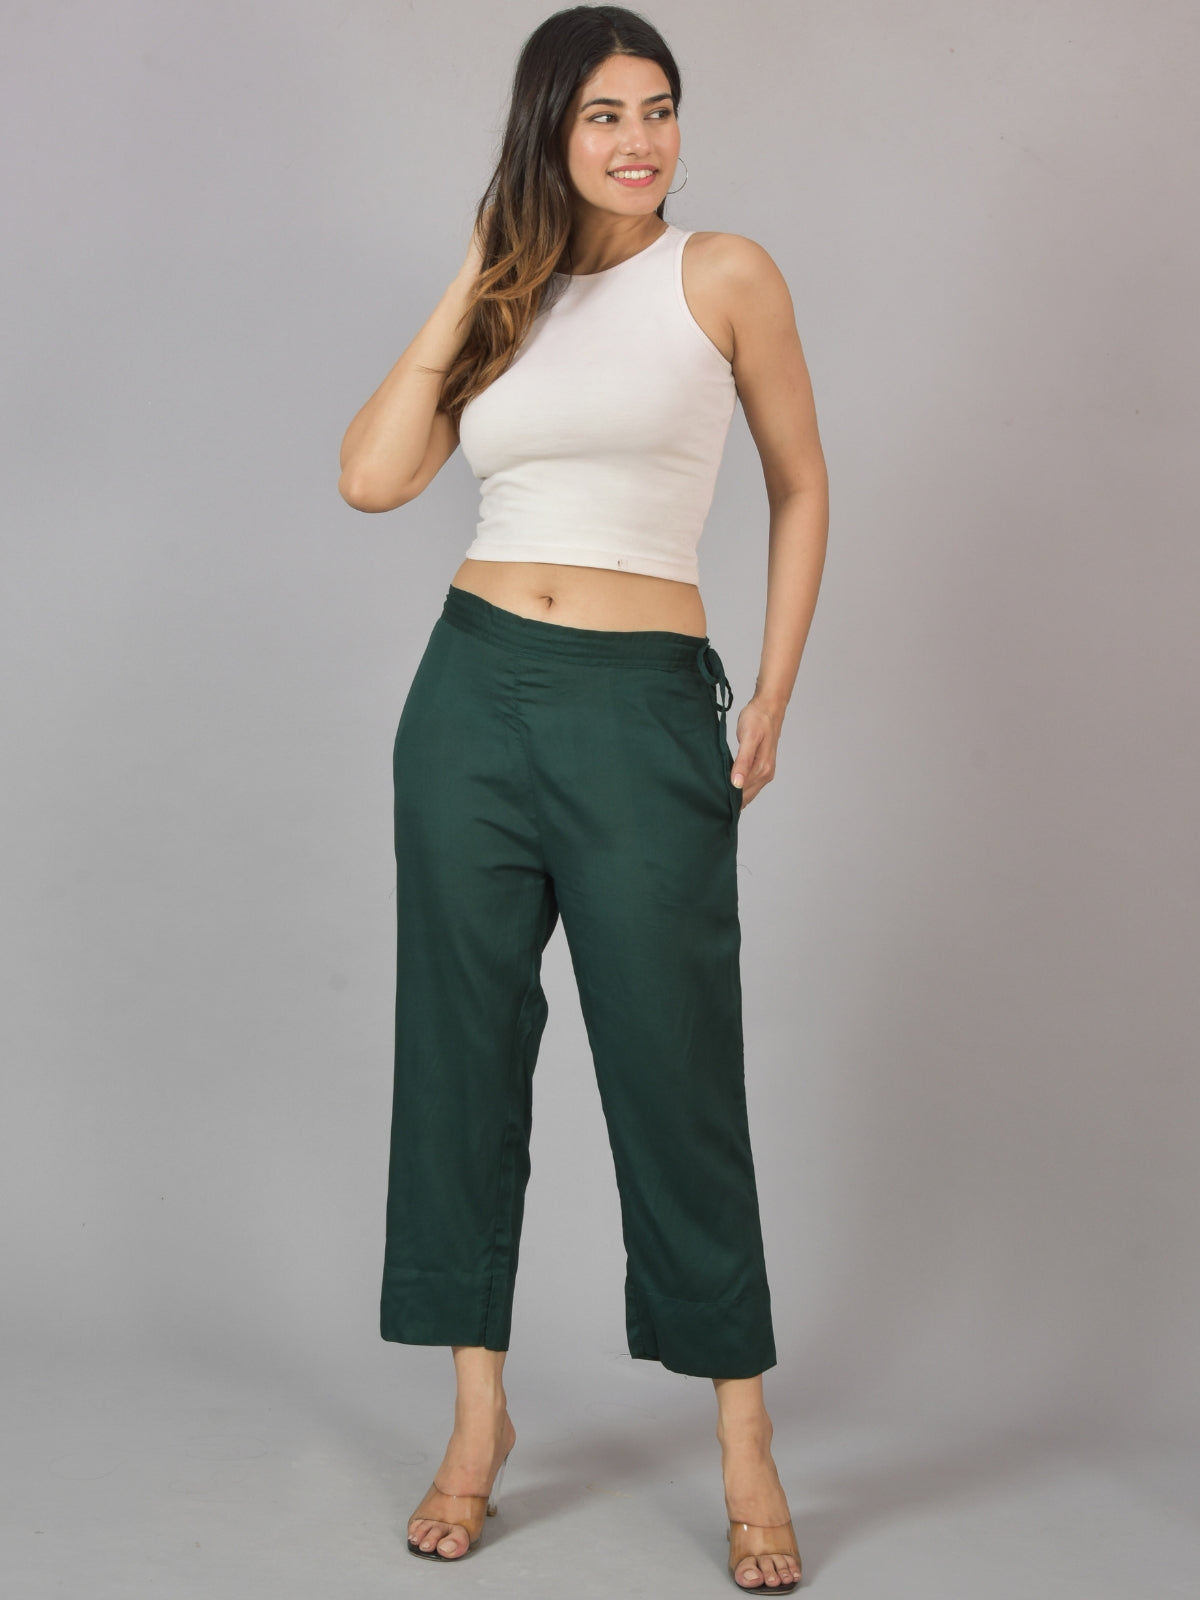 Pack Of 2 Womens Dark Green And Navy Blue Ankle Length Rayon Culottes Trouser Combo